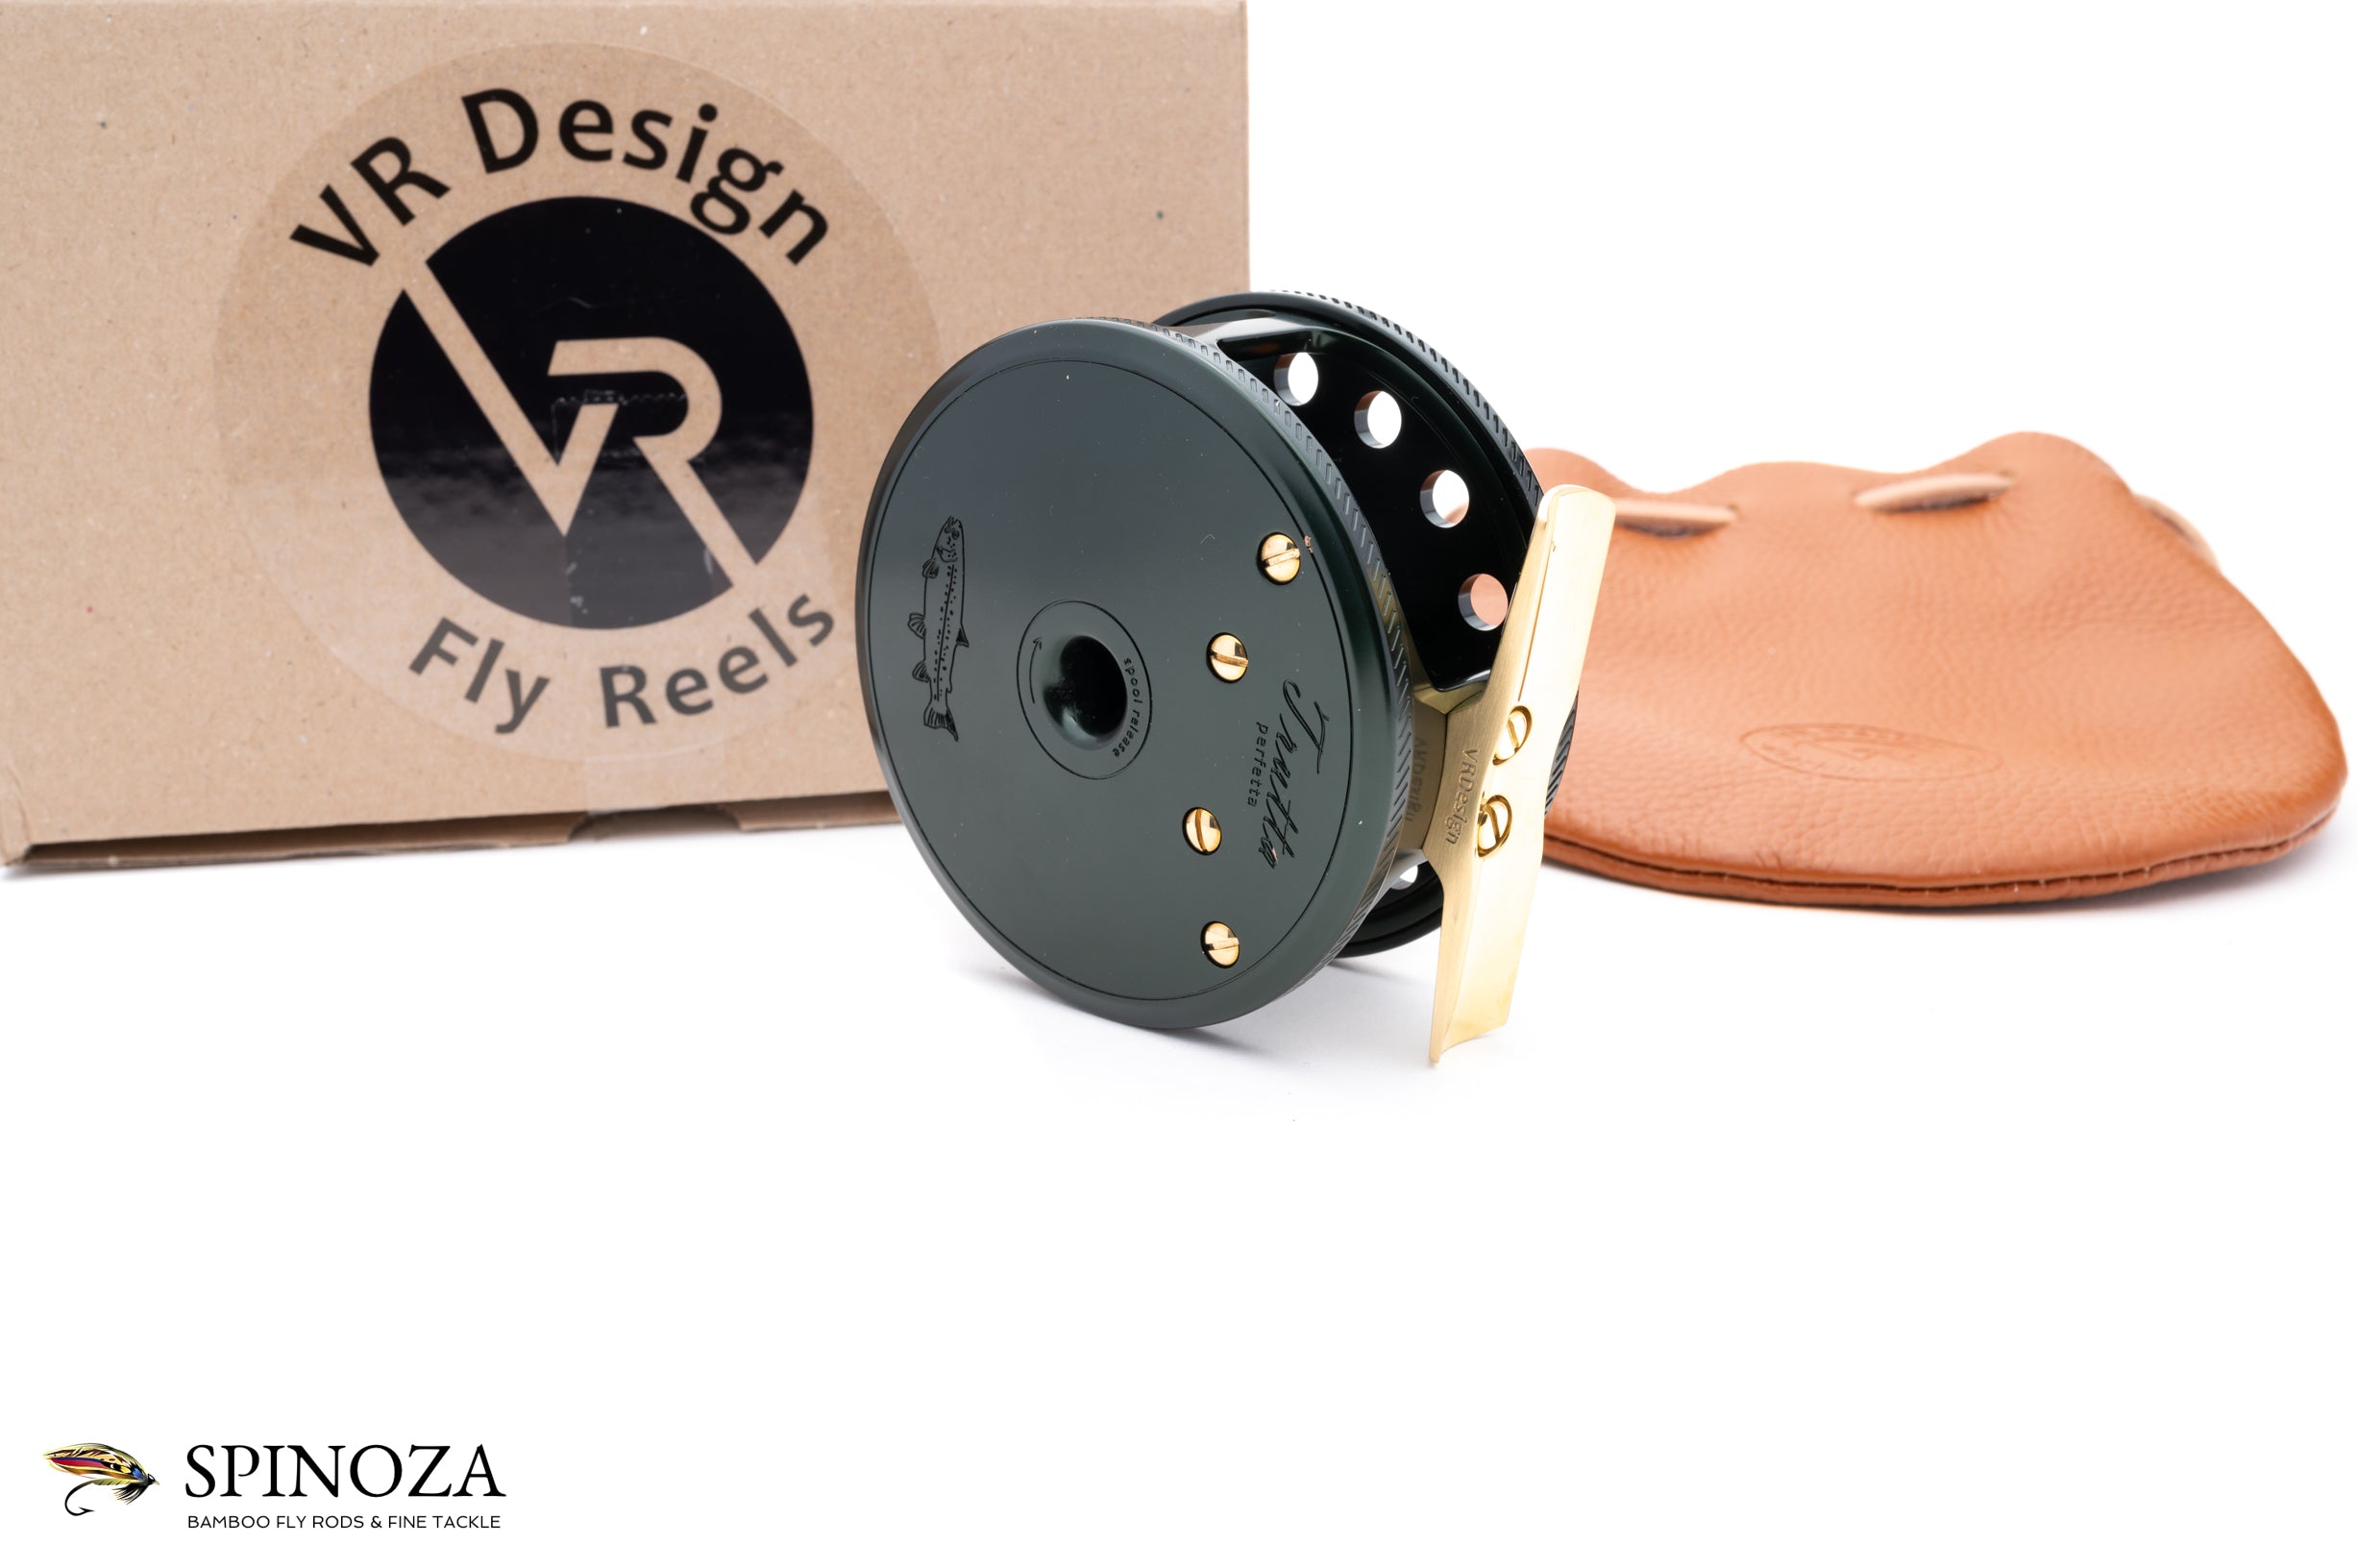 VR Design's 'Trutta Perfection' Fly Reel 2/0, Page 2